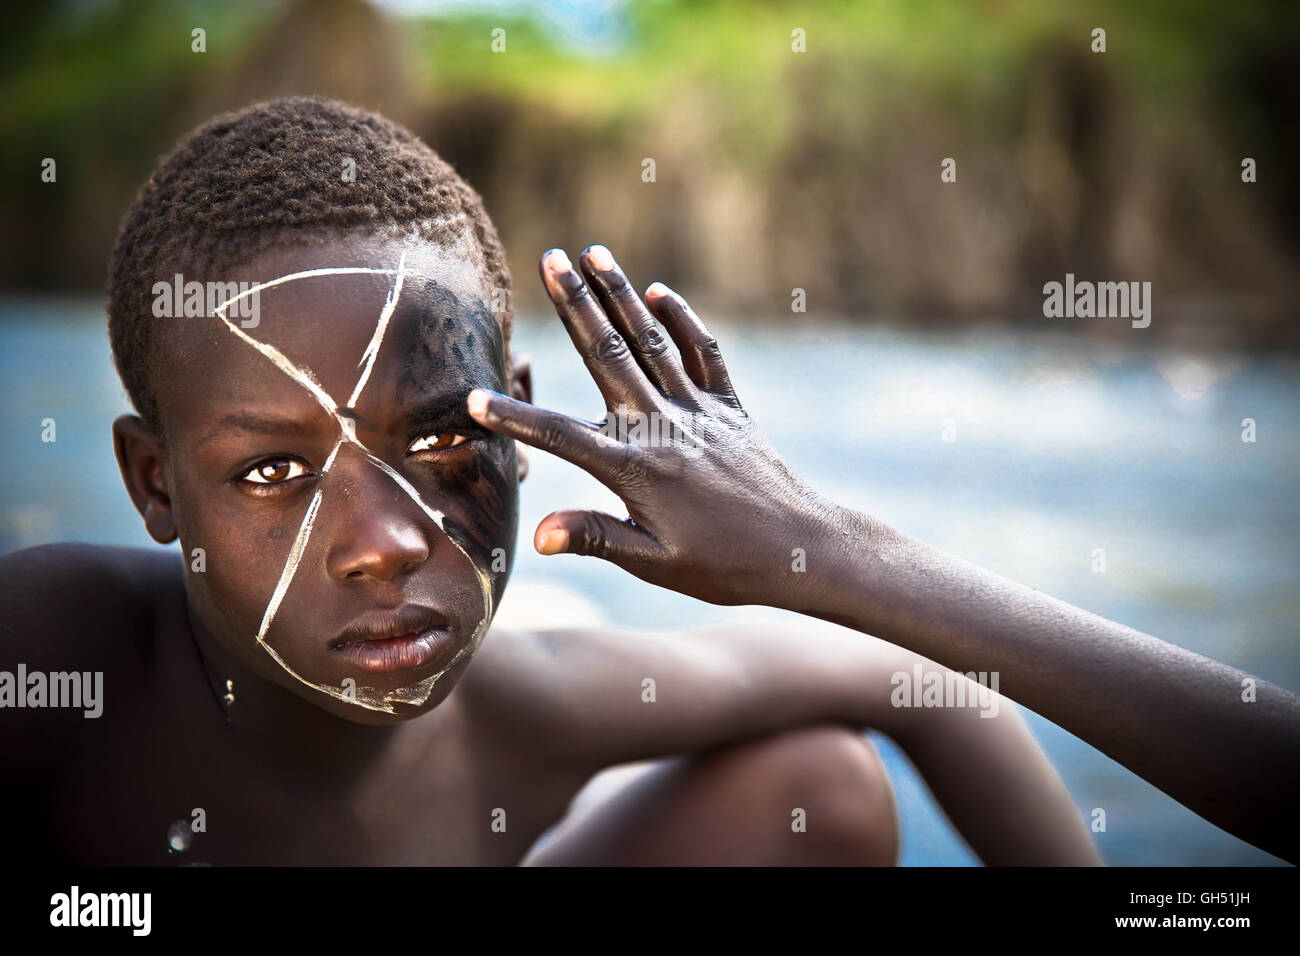 Young boy from Suri tribe with traditional bodypainting. Stock Photo